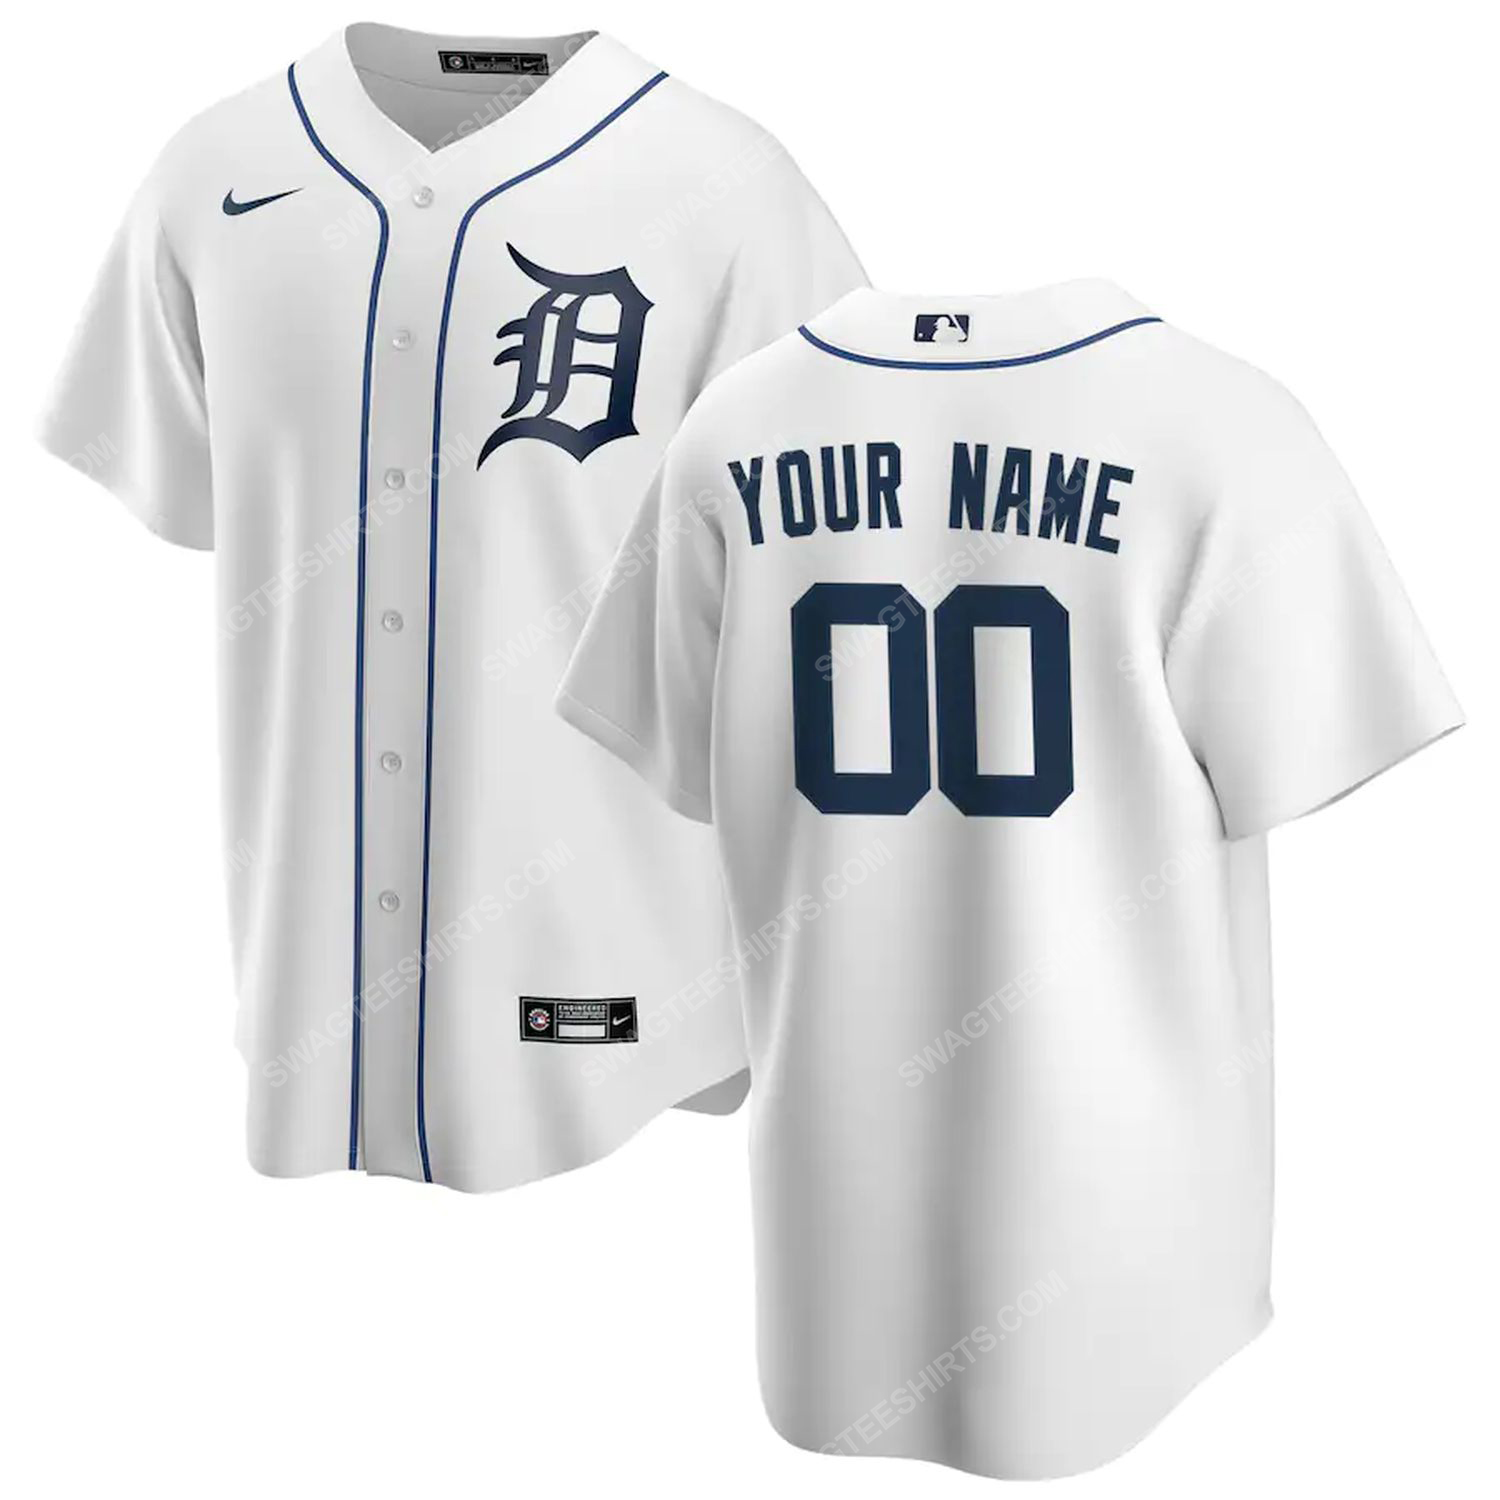 [The best selling] Personalized mlb detroit tigers team baseball jersey